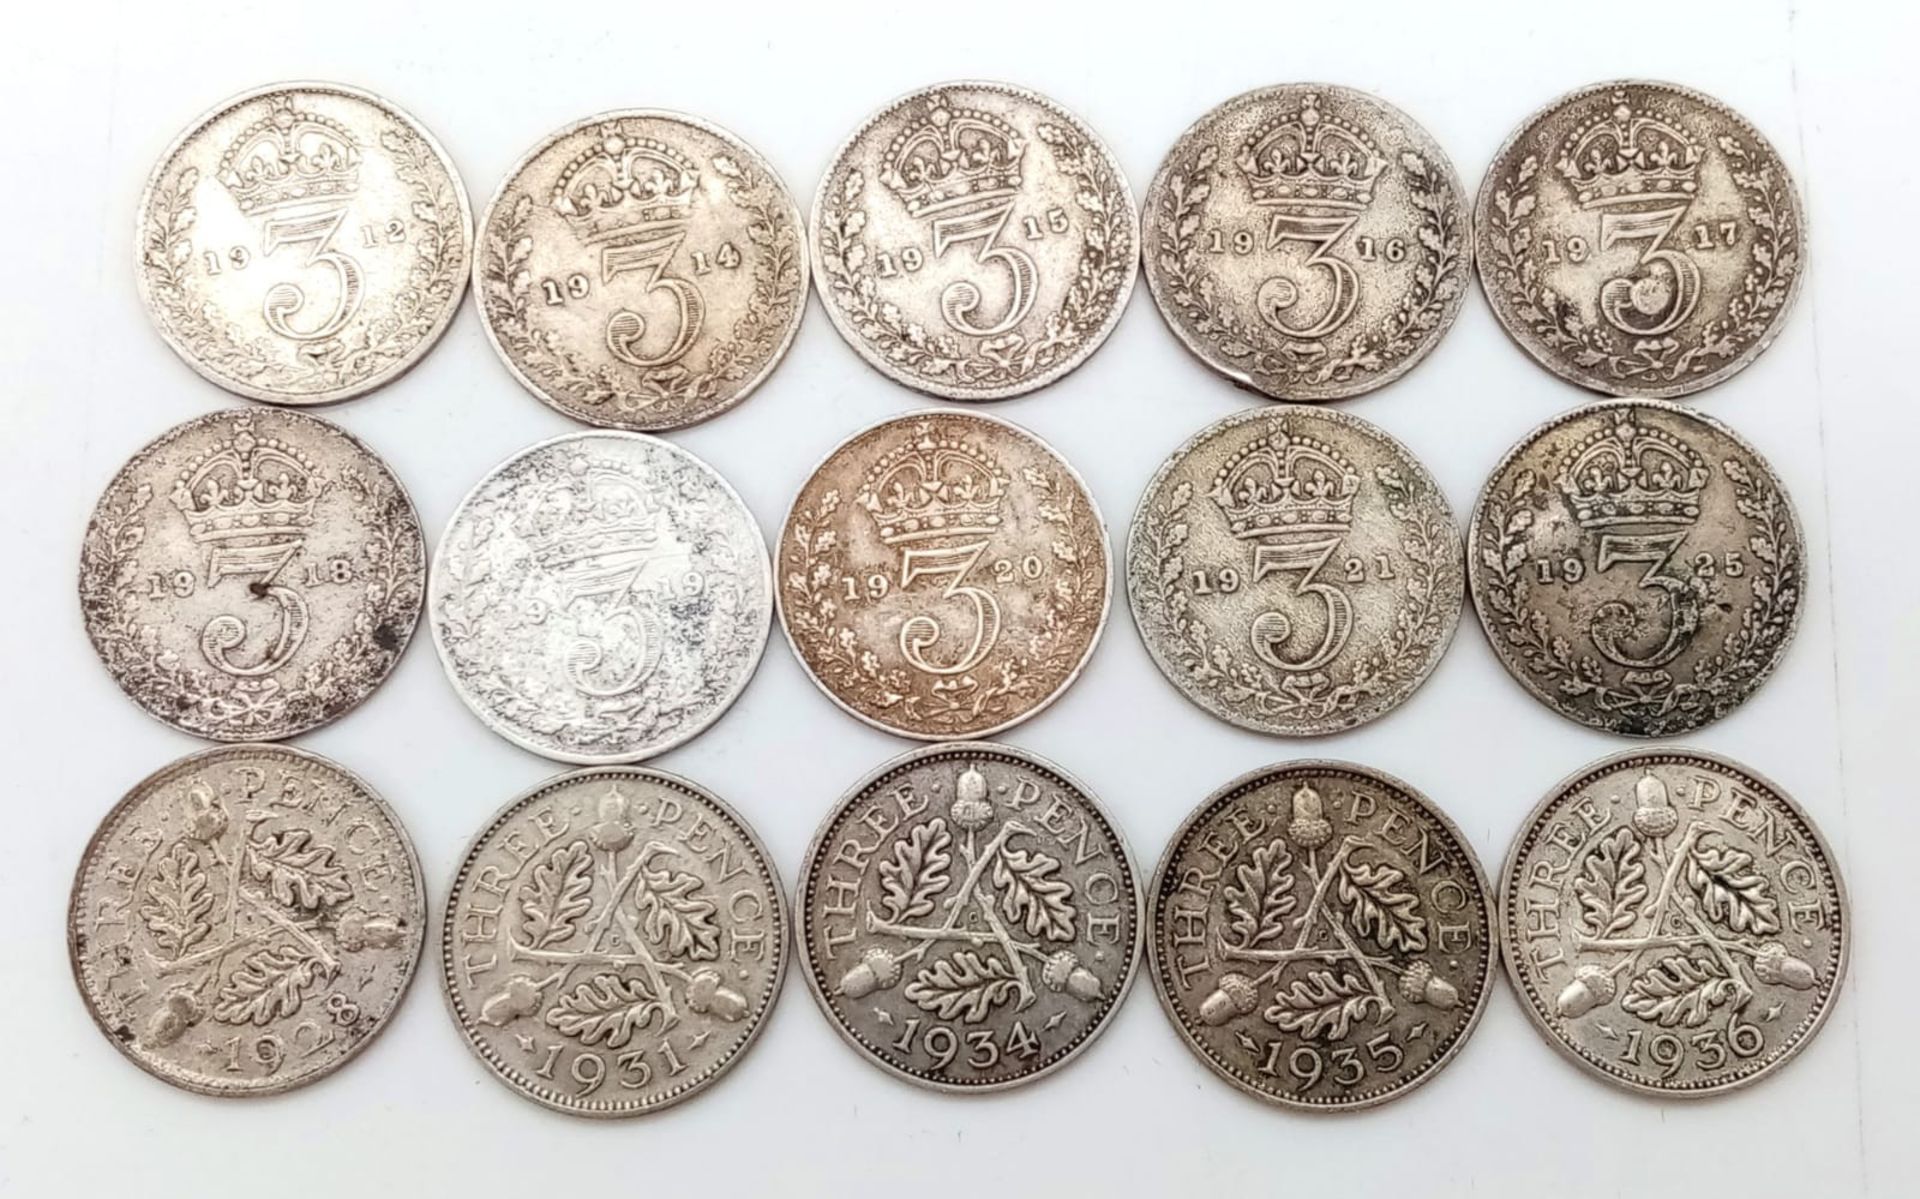 15 Pre 1947 George V Silver 3 Pence Coins. 1912- 36 range. Decent grades but please see photos. - Image 2 of 2